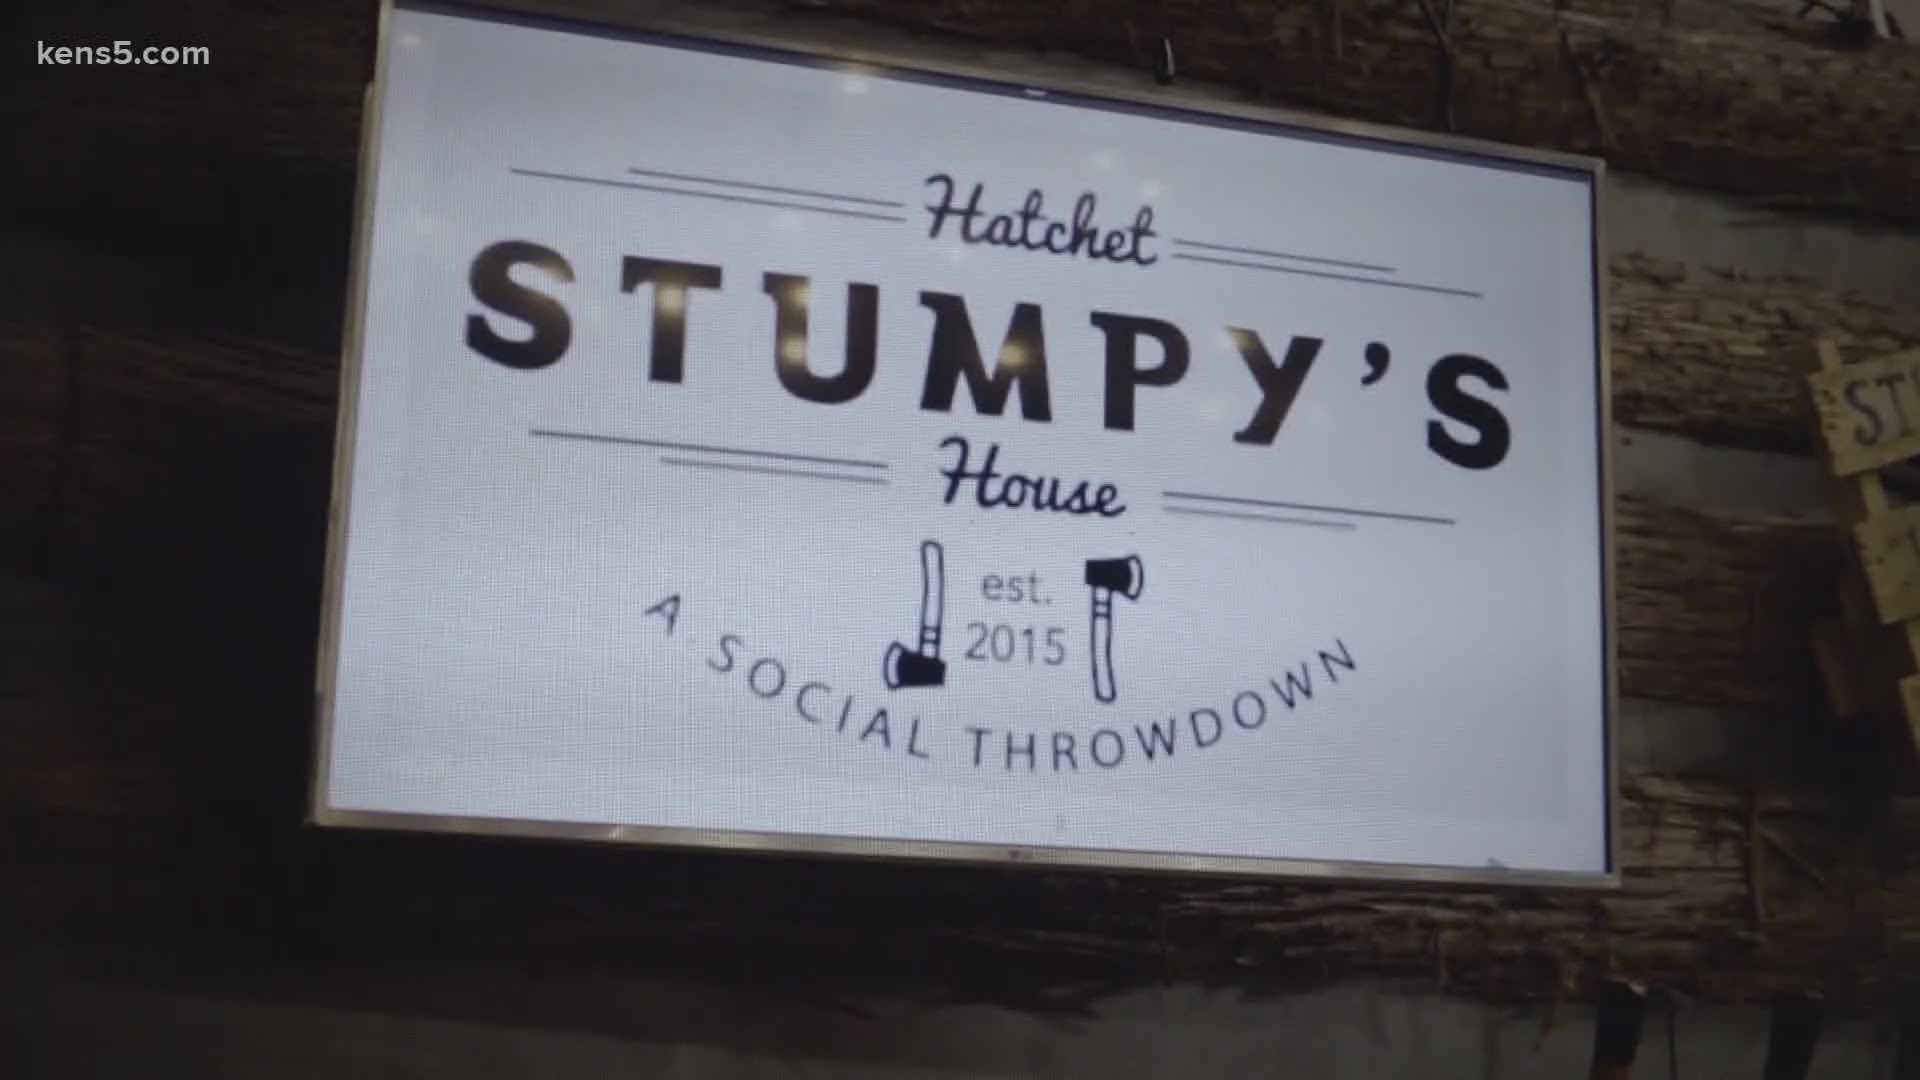 Waterparks, zoos, and mall food courts are now allowed to open, though not all are. Here's what to expect from Stumpy's Hatchet House.